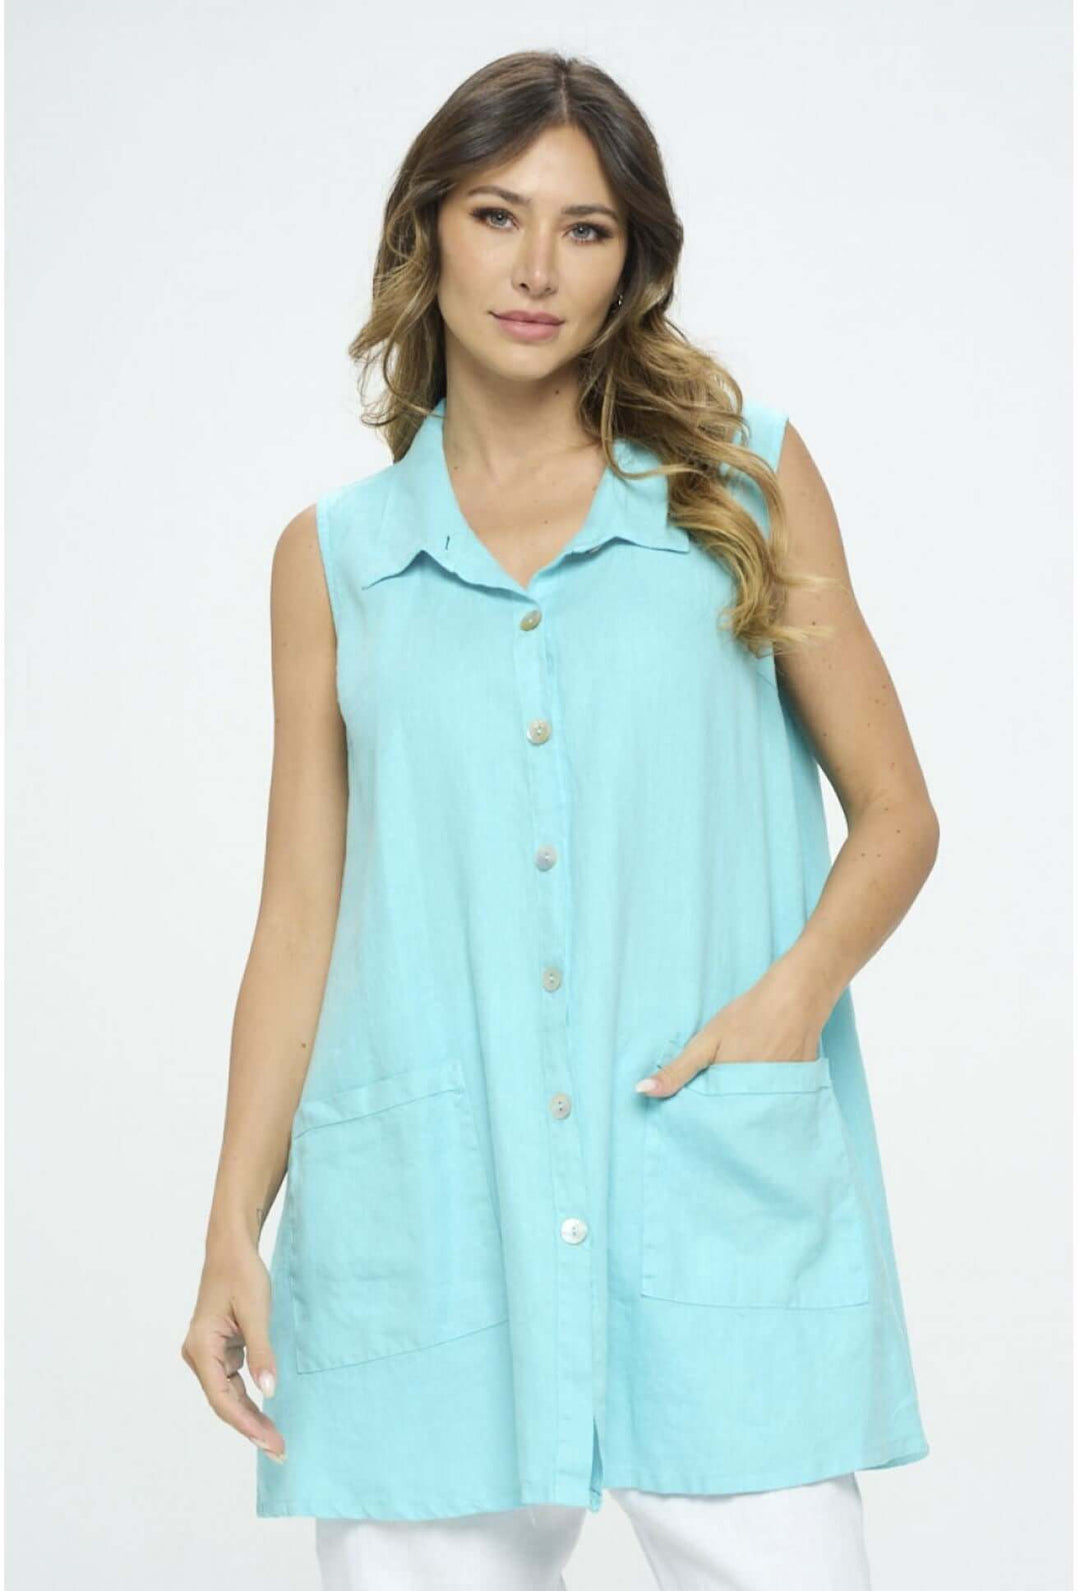 USA Made 100% Linen Ladies Sleeveless Aqua Button Down Tunic with Pockets | Match Point Style LT267 | Classy Cozy Cool Women's Made in America Boutique